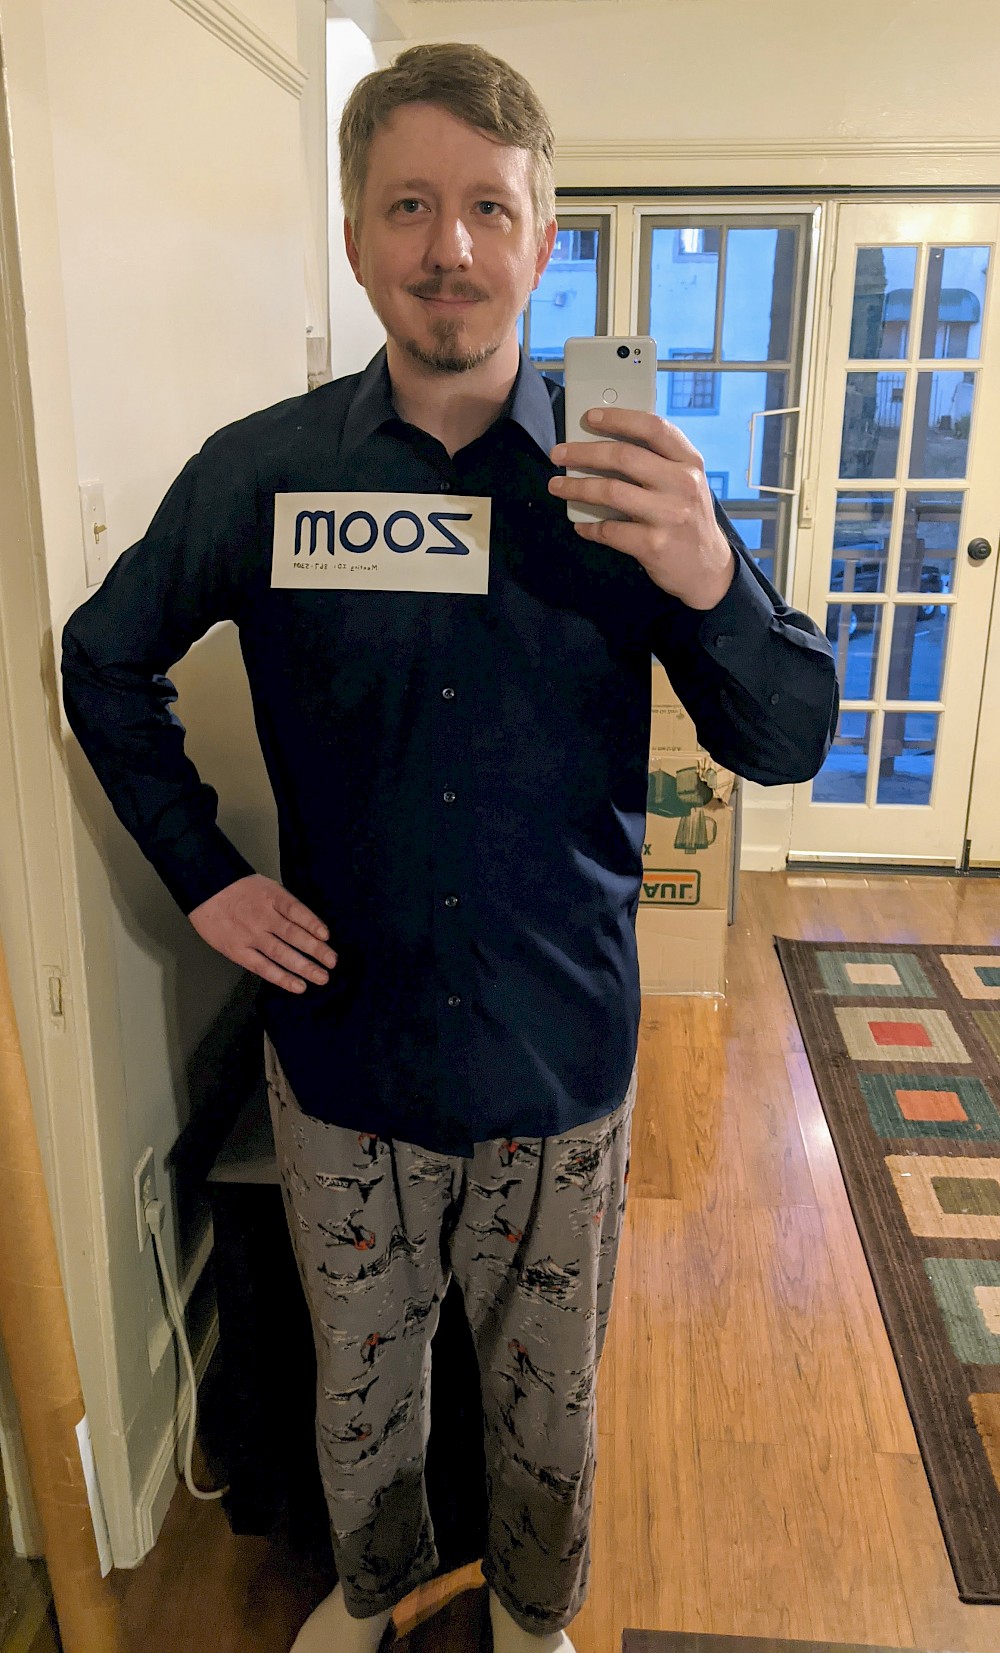 myself wearing a navy button-down shirt and pajama pants. Tag on my shirt has the Zoom logo and meeting ID: 867-5309